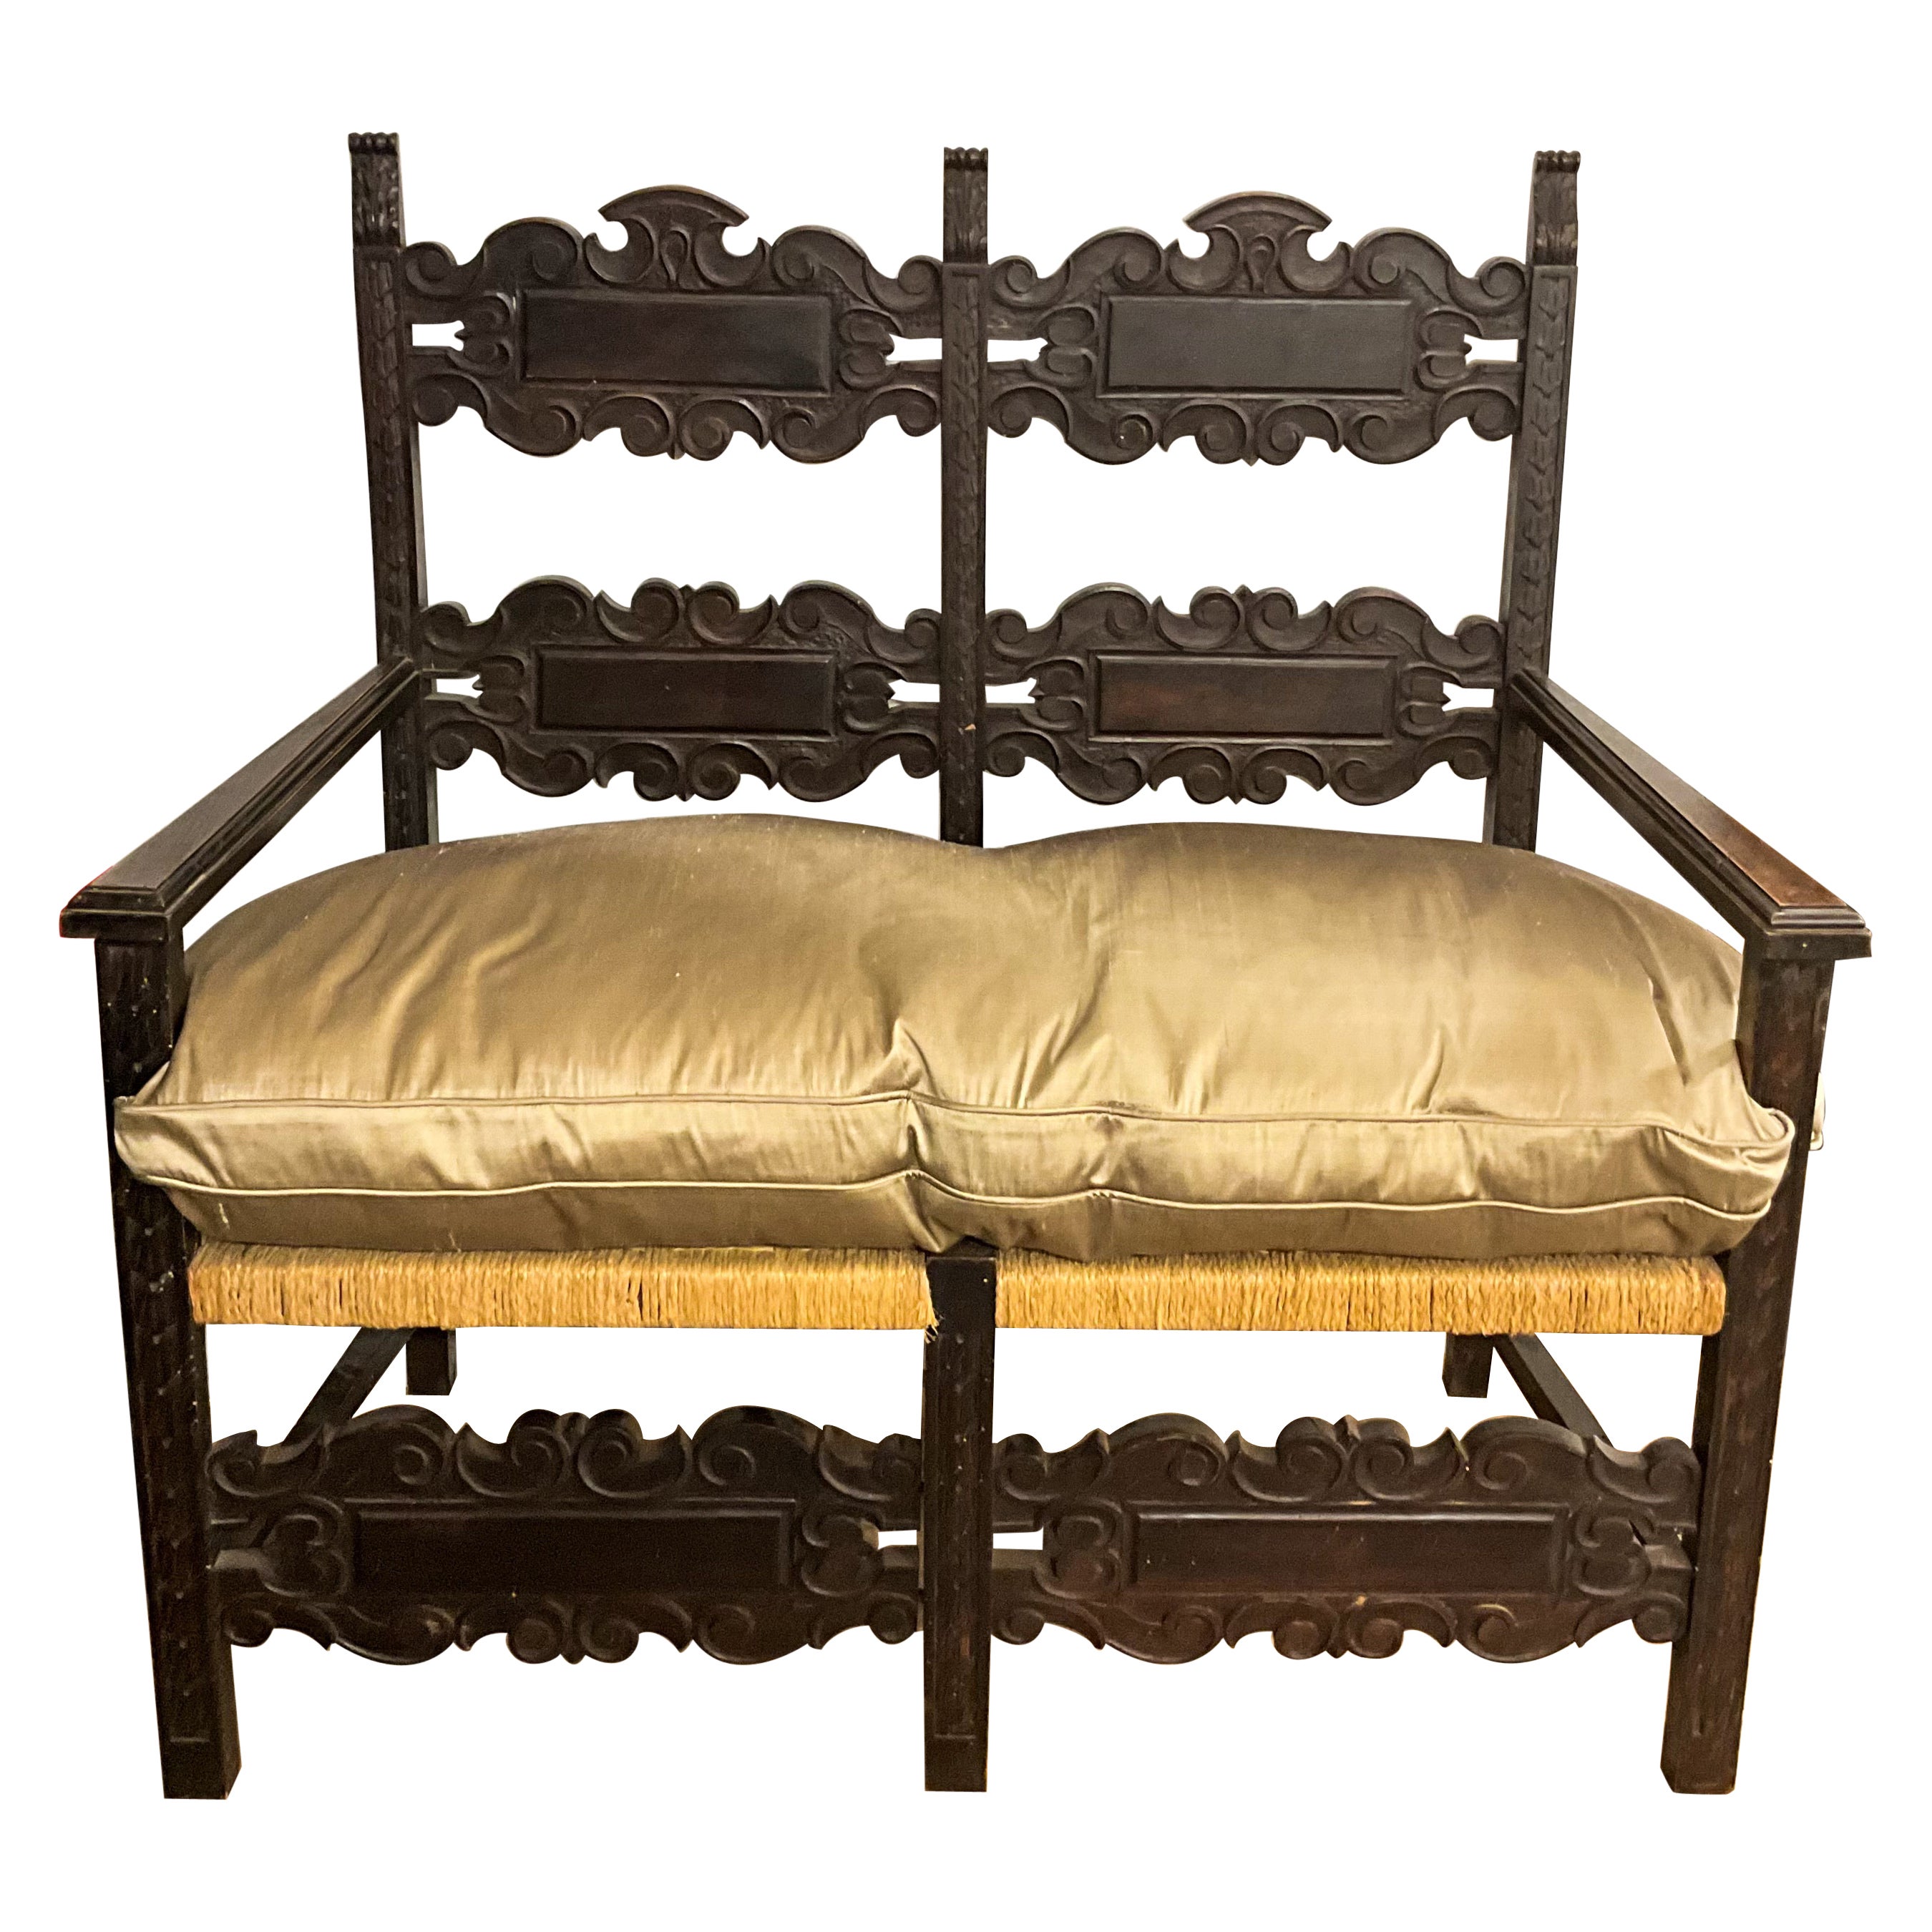 19th-C. French Ebonized Carved Oak Settee With Rush Seat & Silk Down Cushion For Sale